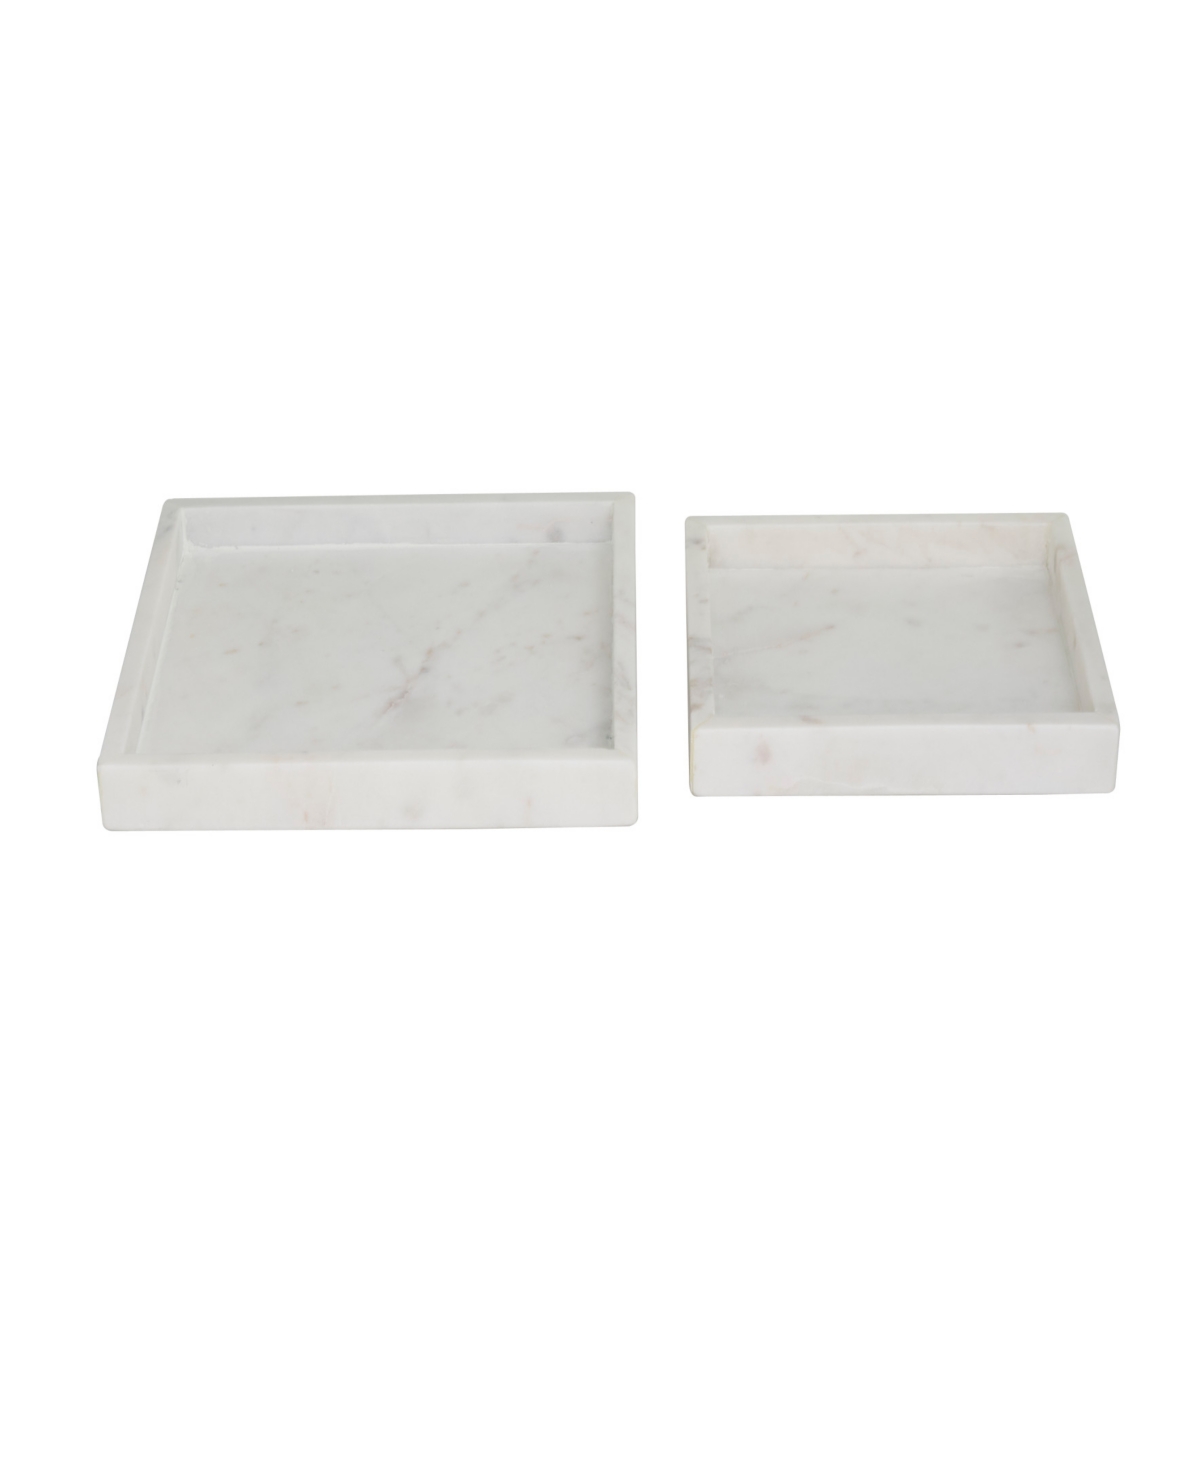 Rosemary Lane Marble Tray With Raised Border, Set Of 2, 10", 8" W In White